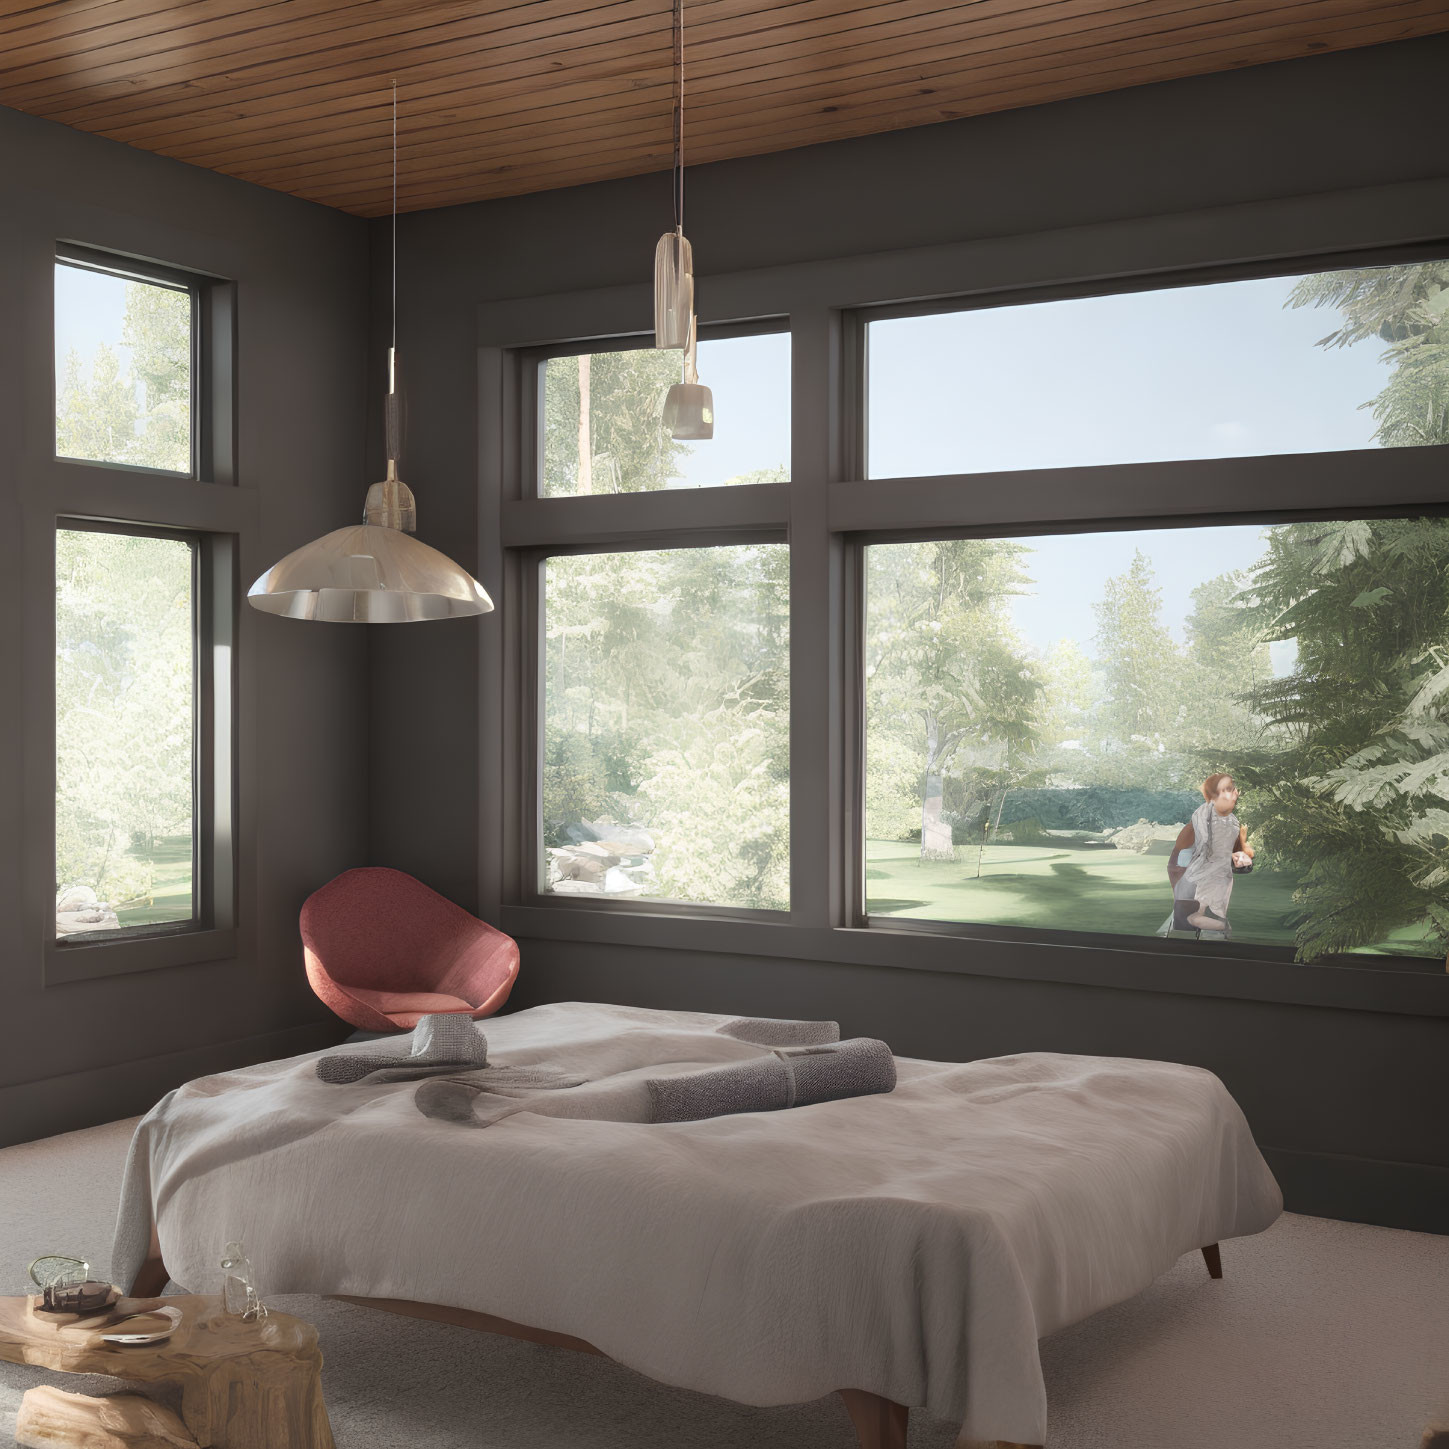 Modern Bedroom with Large Windows, Grey Bed Linens, Red Chair, Wooden Ceiling, and Nature View